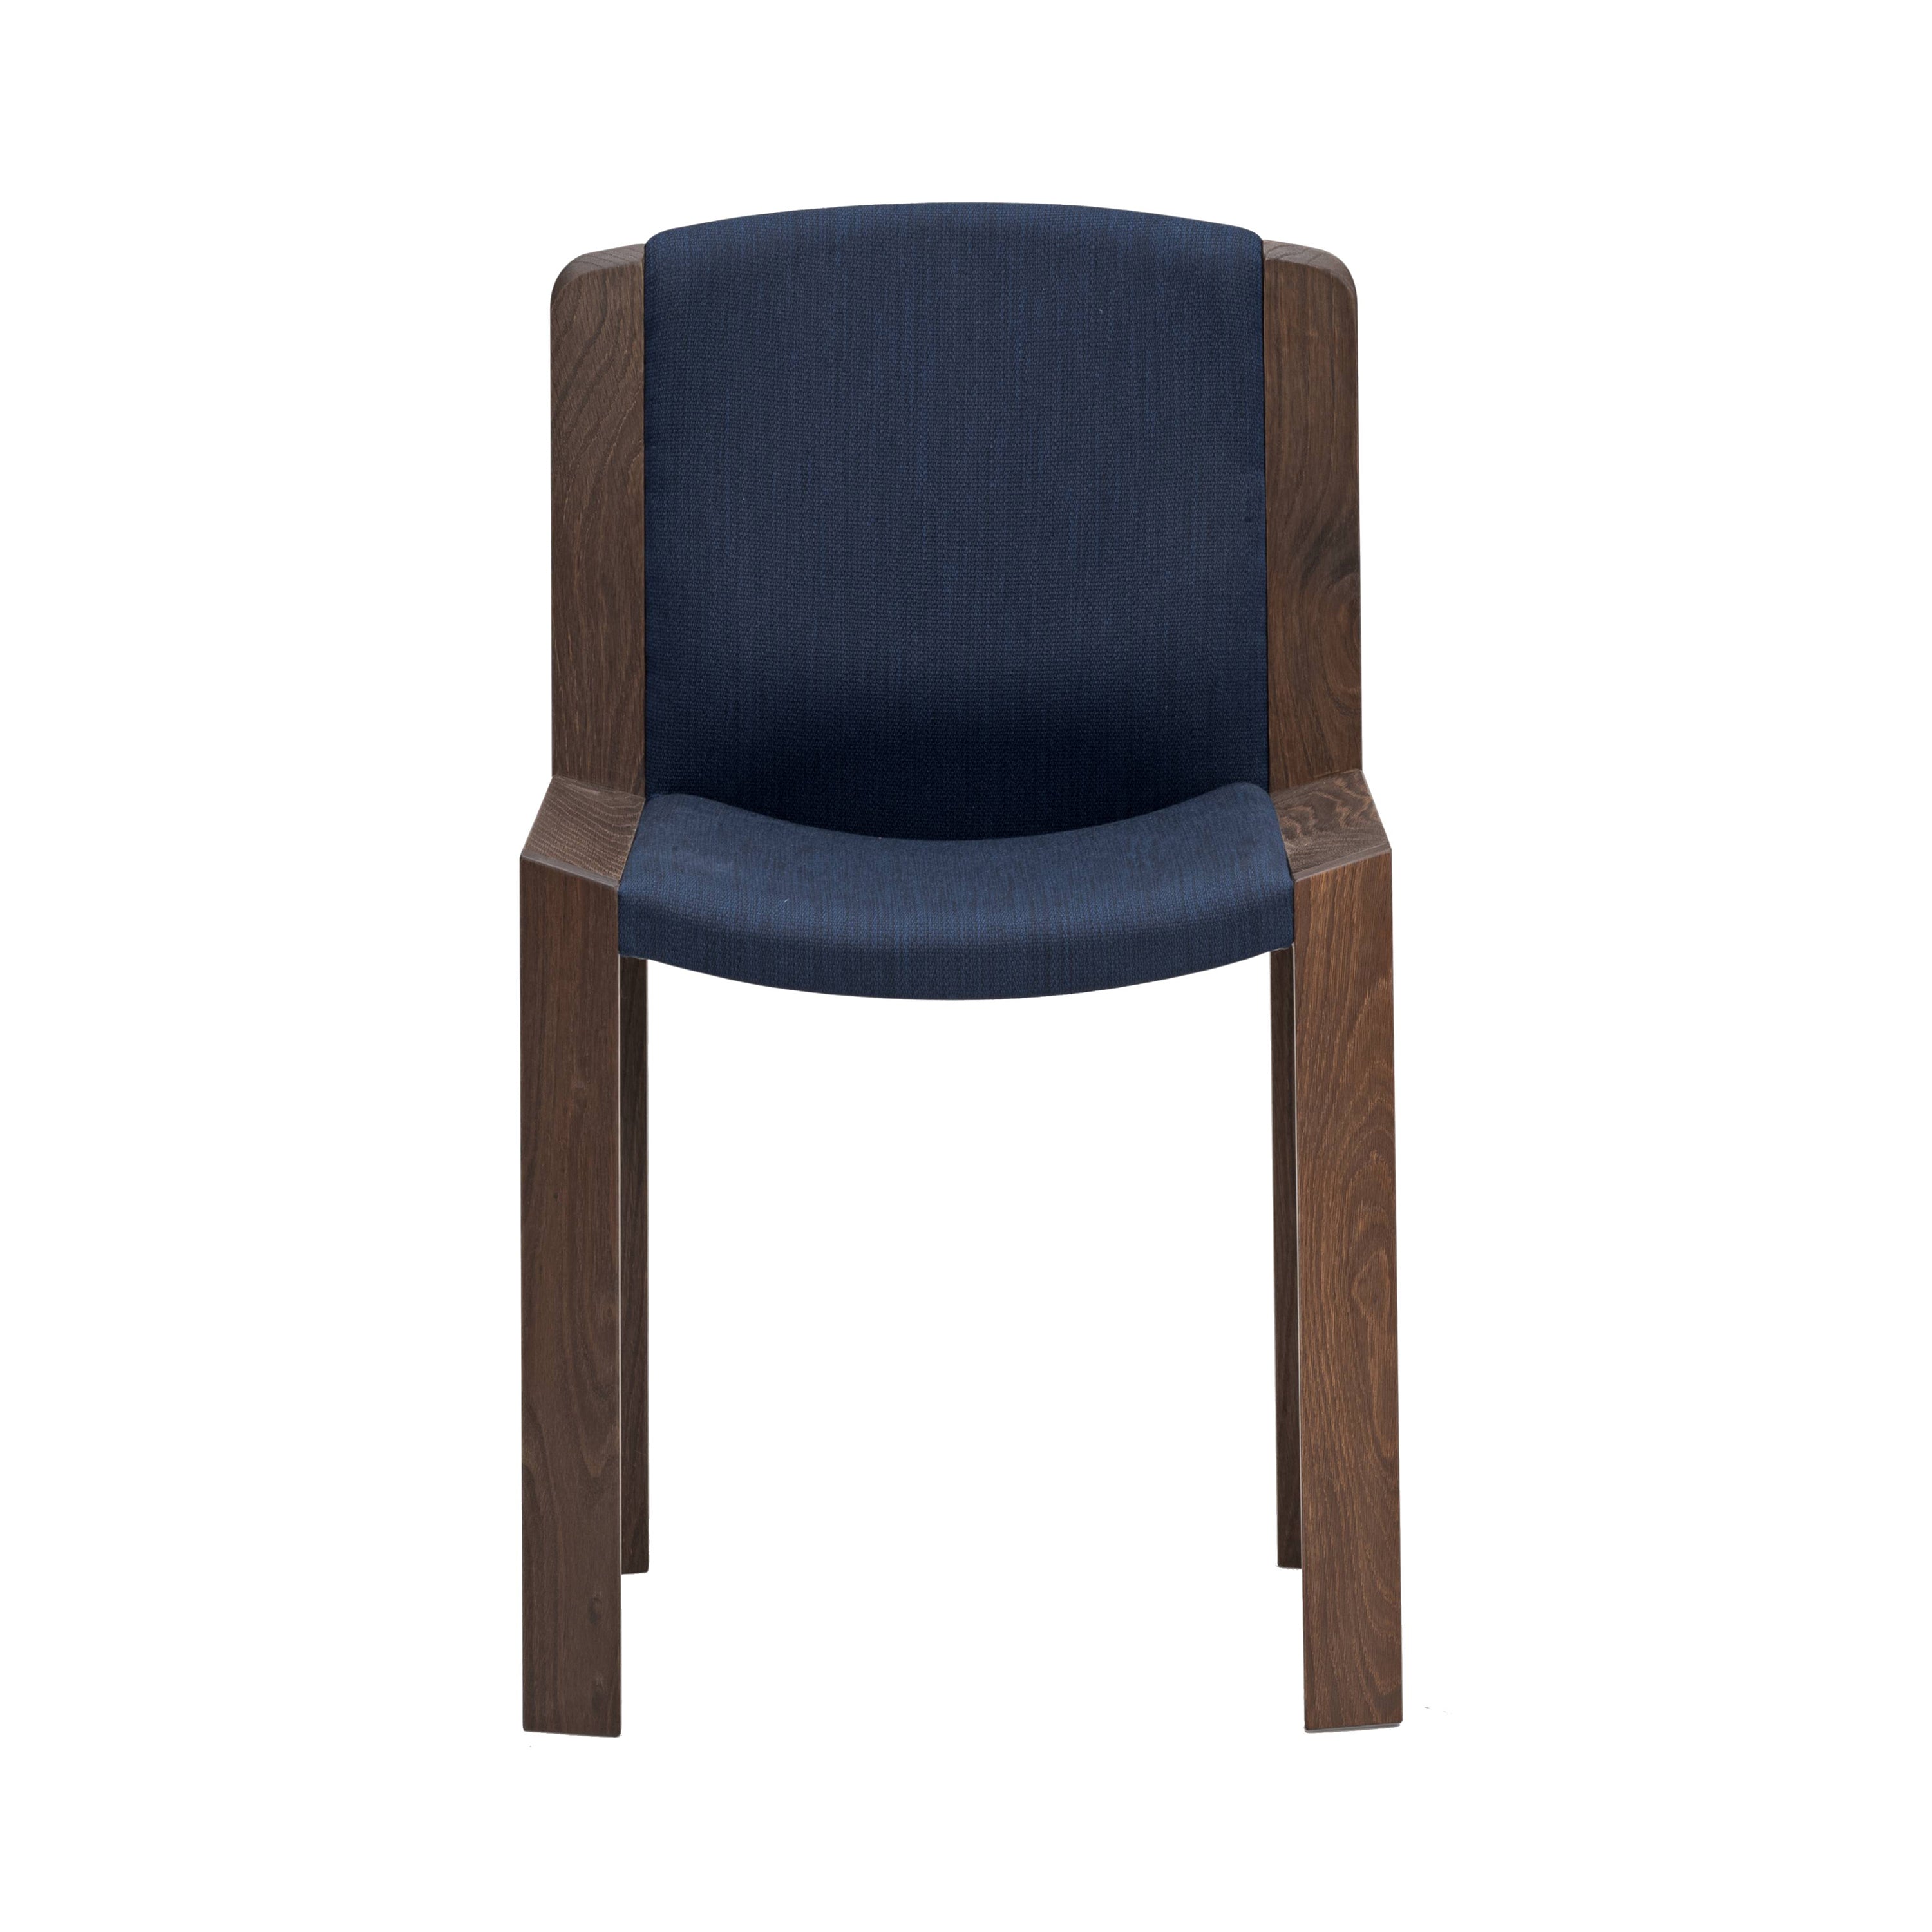 Chair 300: Smoked Stained Oak